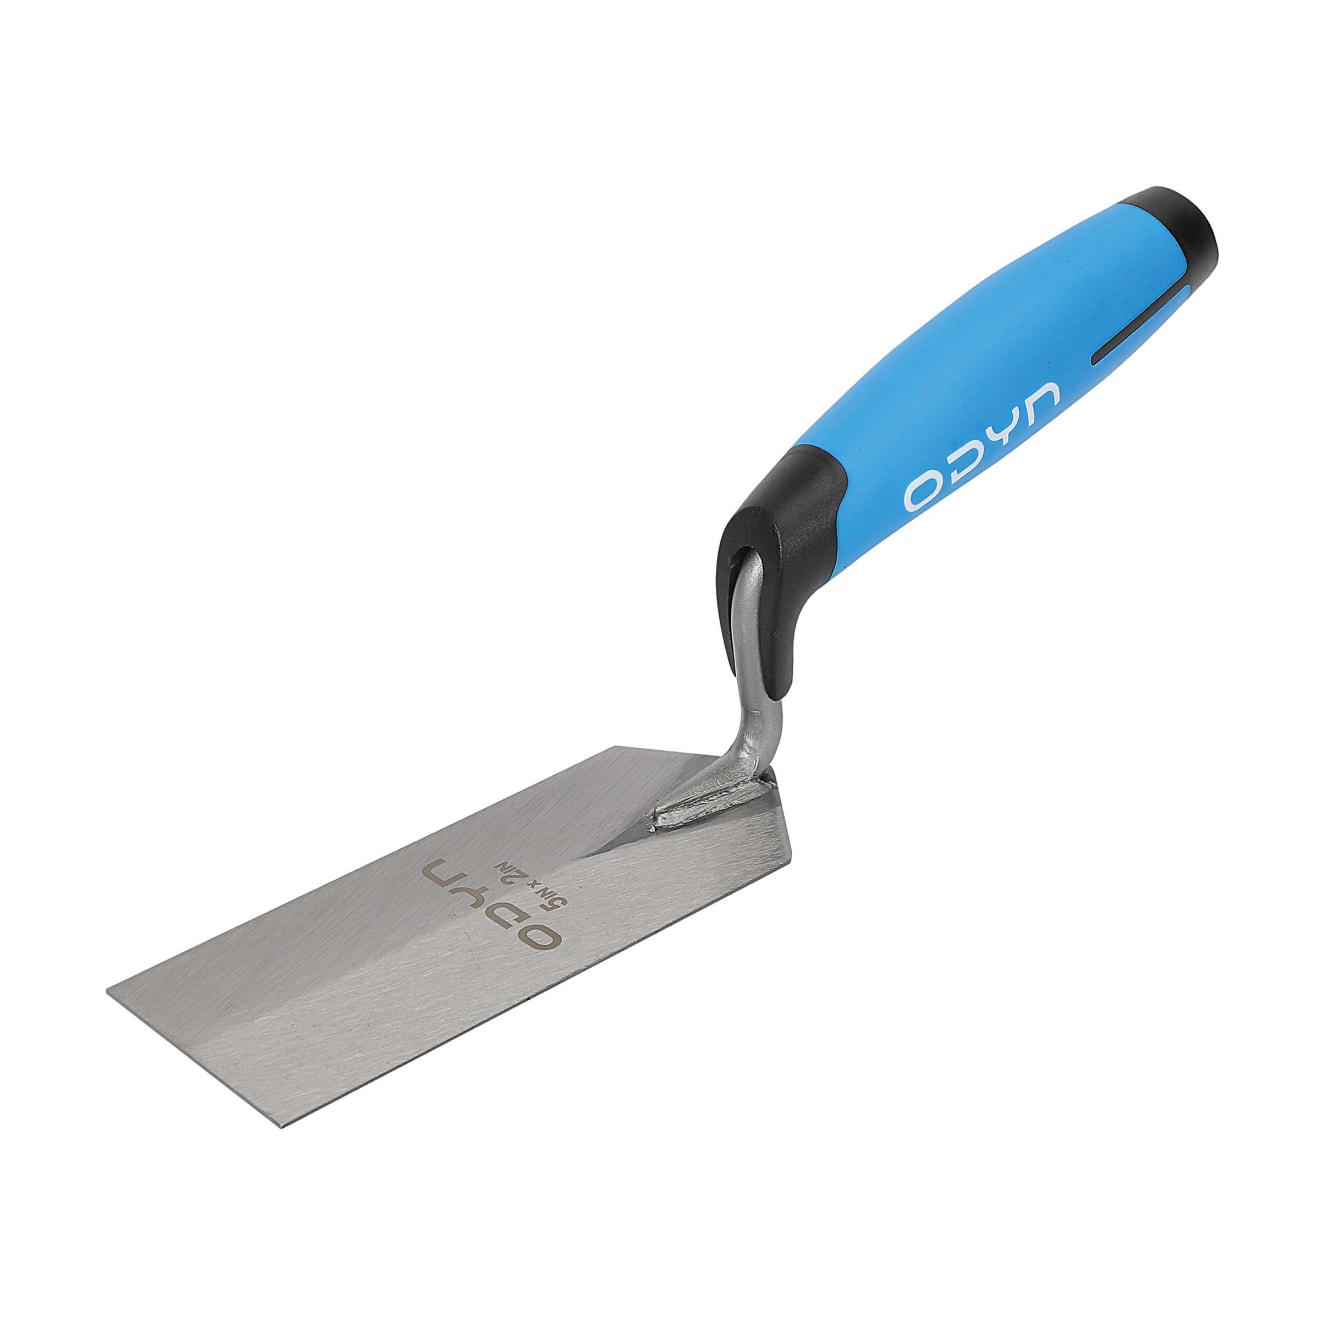 Margin Trowel Pro 5" x 2" For Patch Work Hard To Reach Areas Spreading Thin Set 